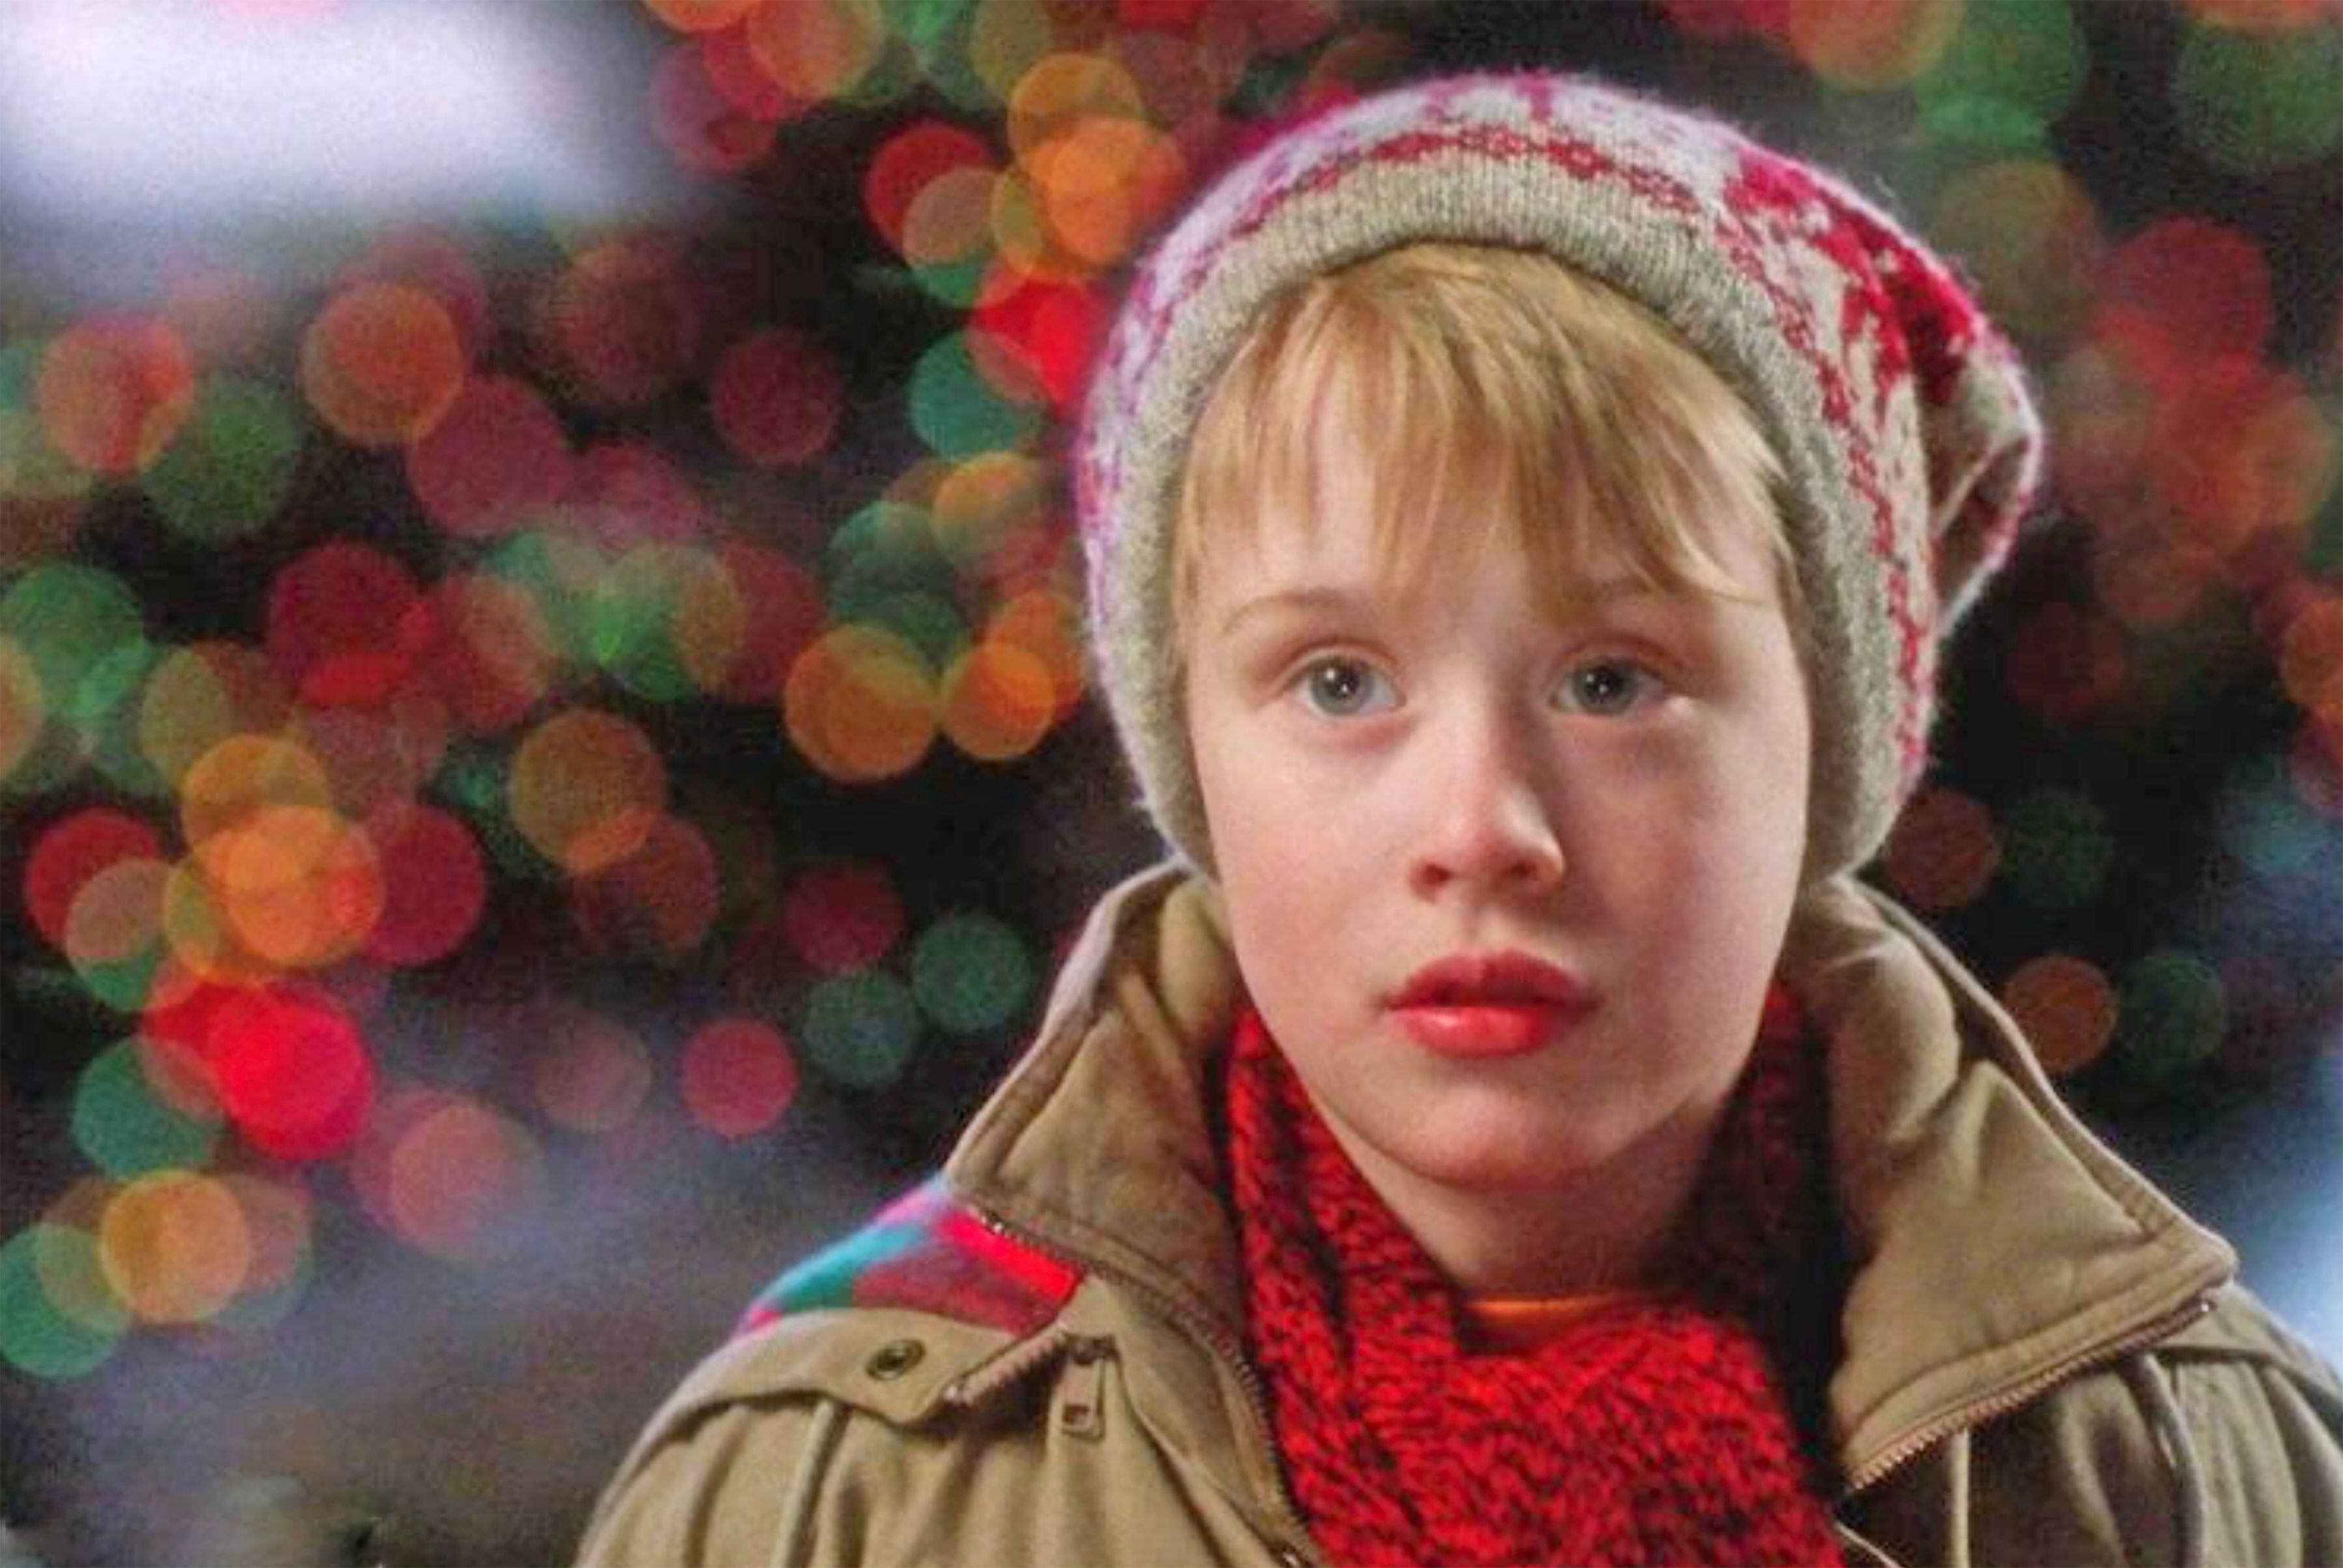 Macauley's on-screen dad would have a hefty price to pay to repair the damage he did